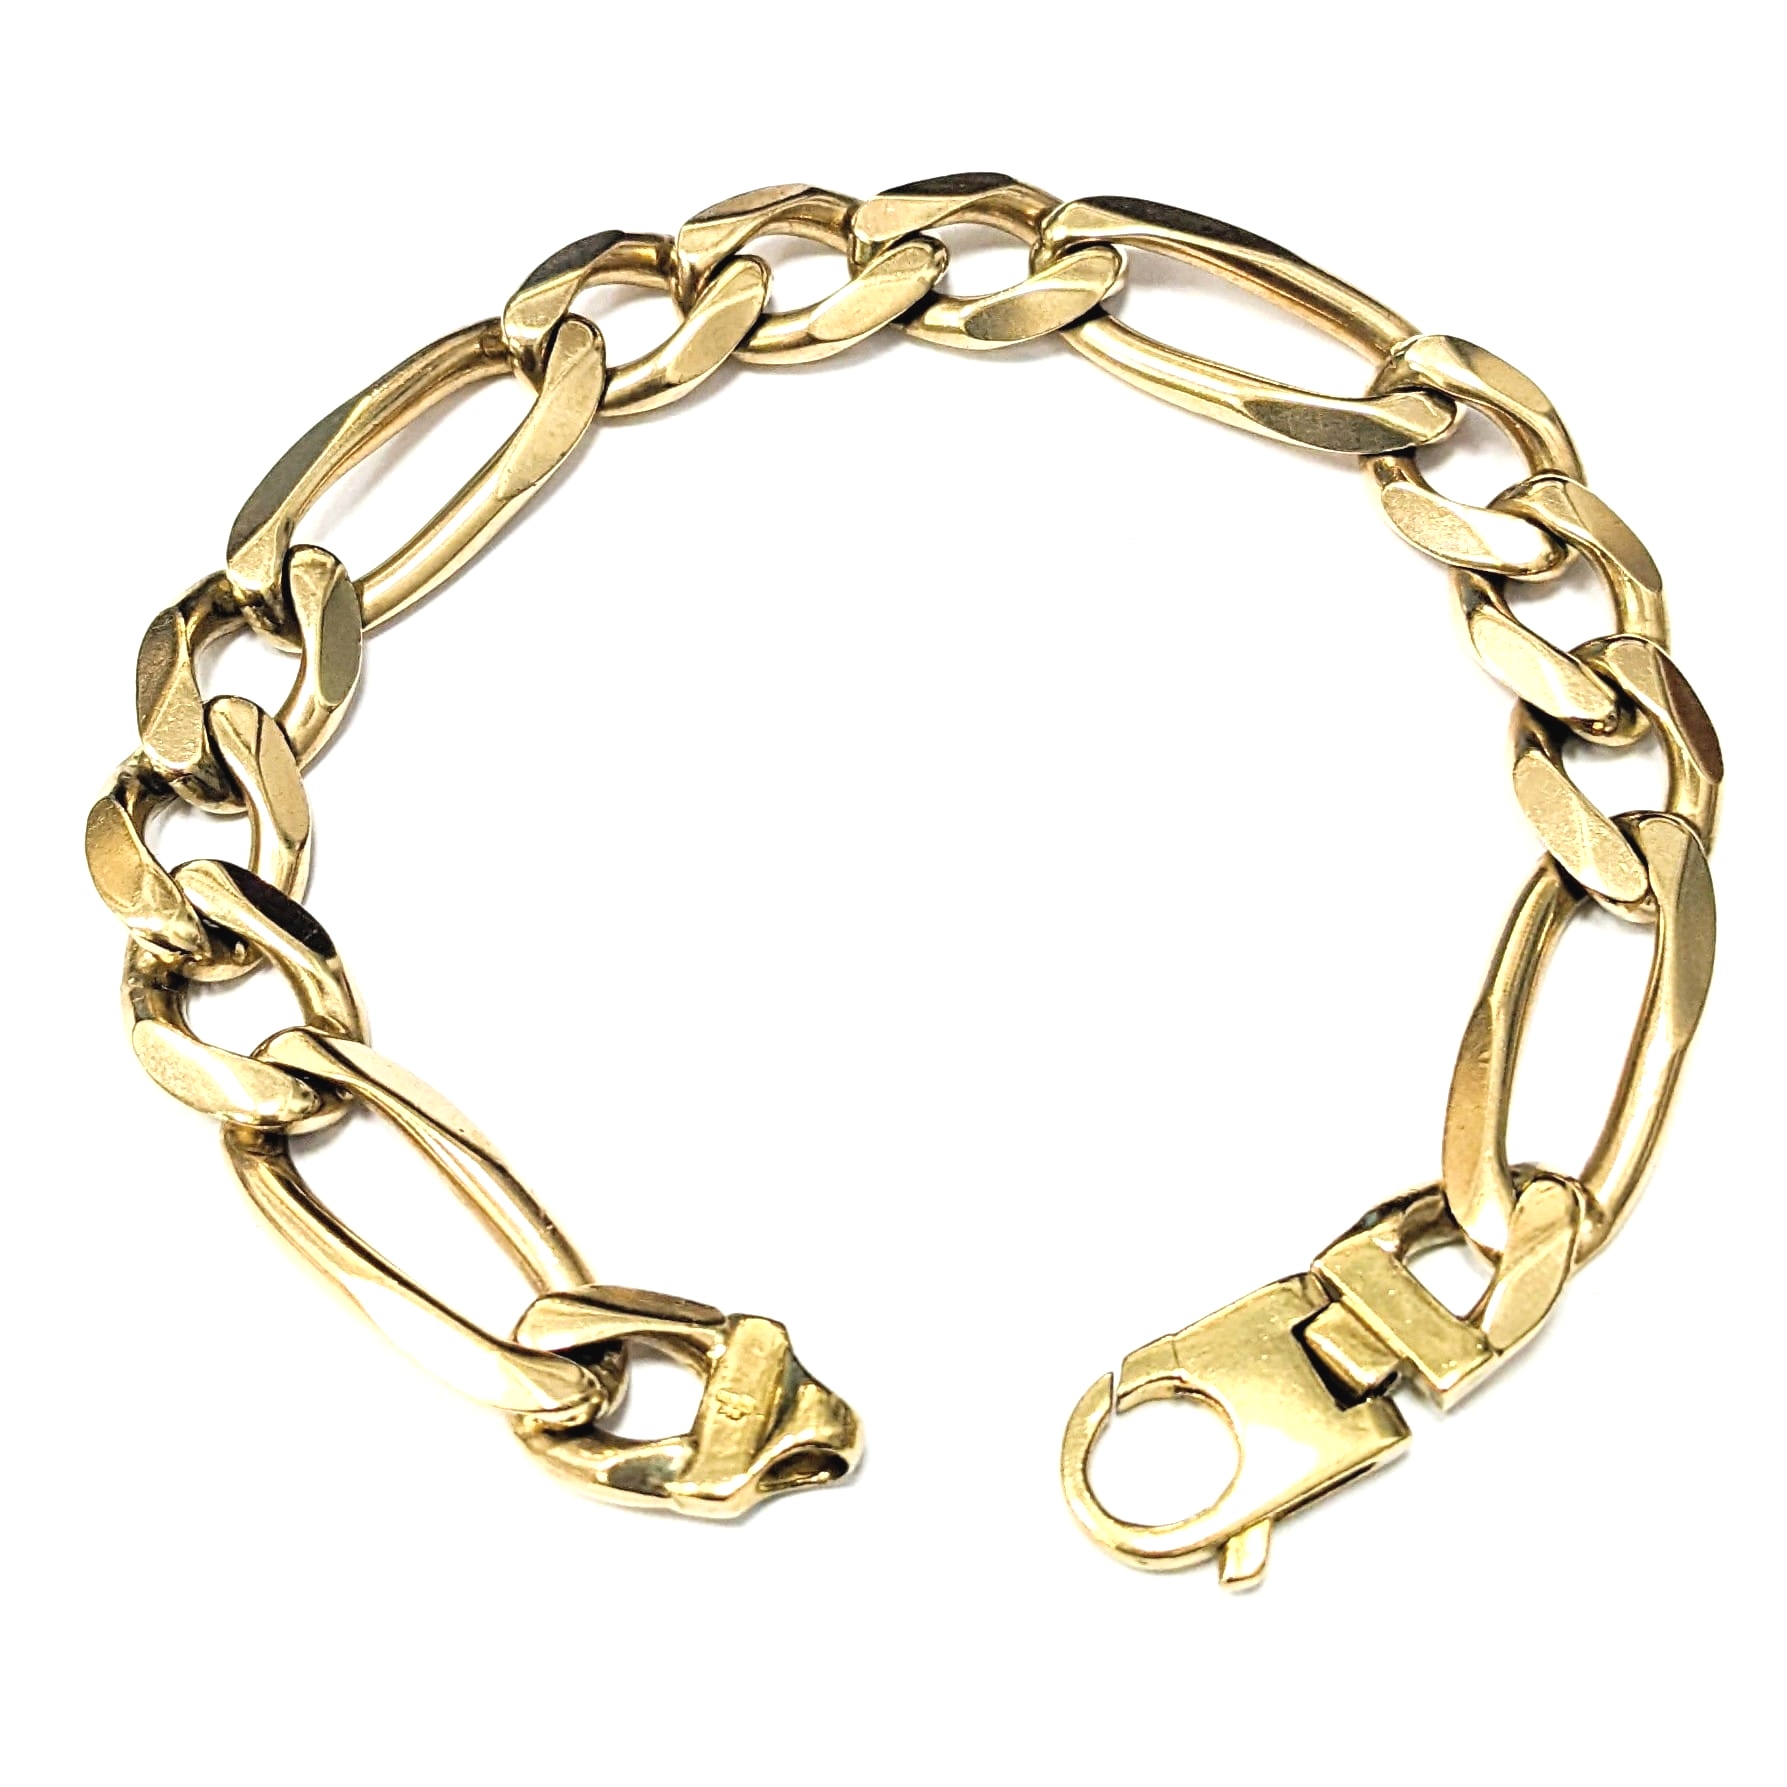 18K Gold Filled Figaro 5mm Link Chain Bracelet for Wholesale Bracelets  Chains Jewelry Making Supplies I259 - Etsy